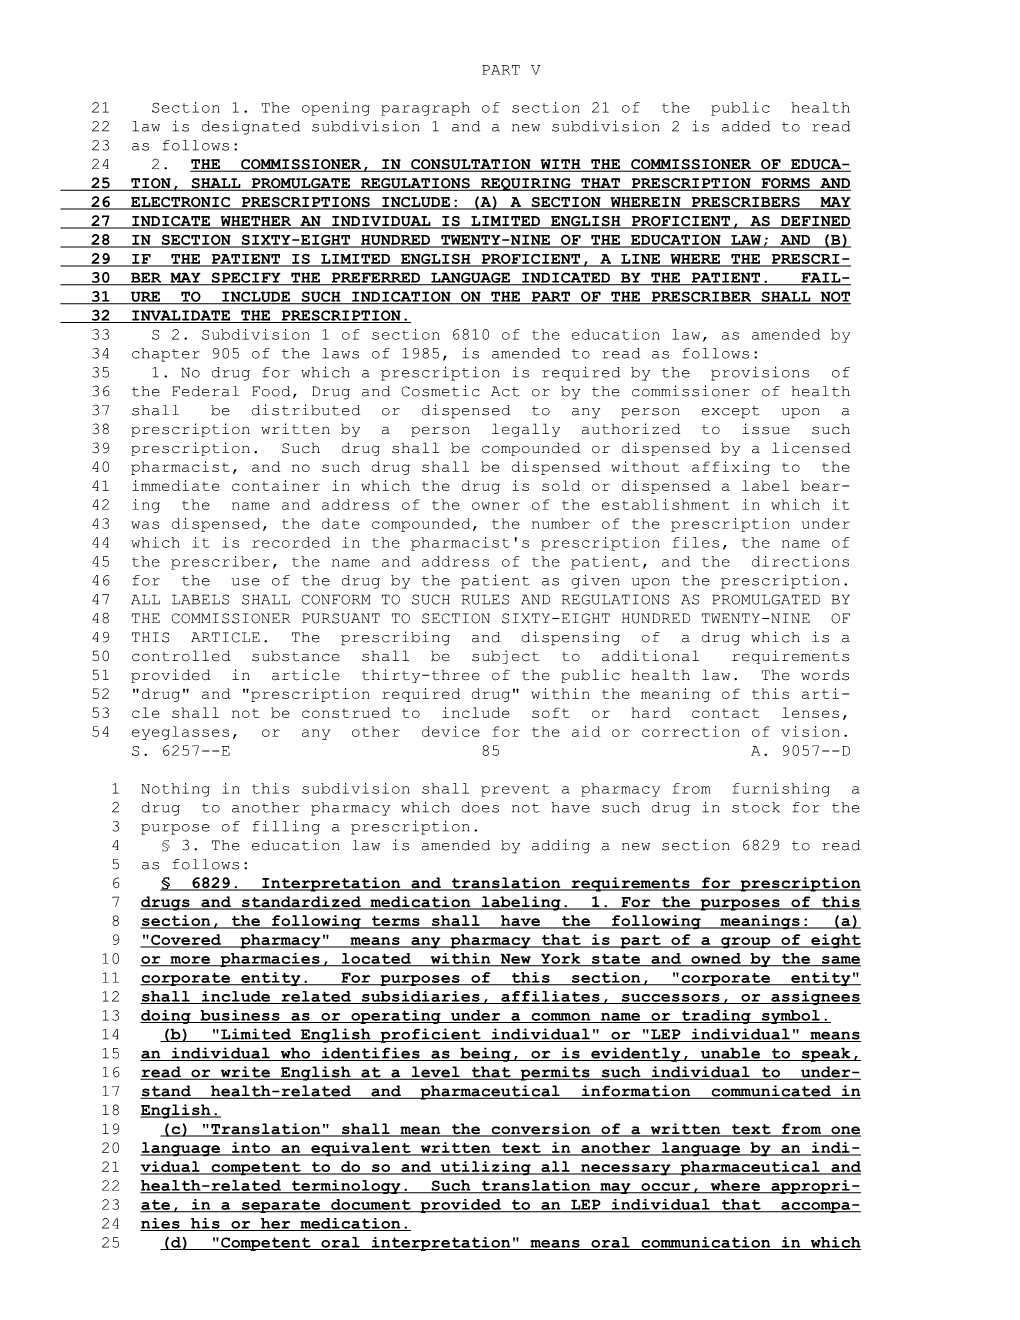 21 Section 1. the Opening Paragraph of Section 21 of the Public Health